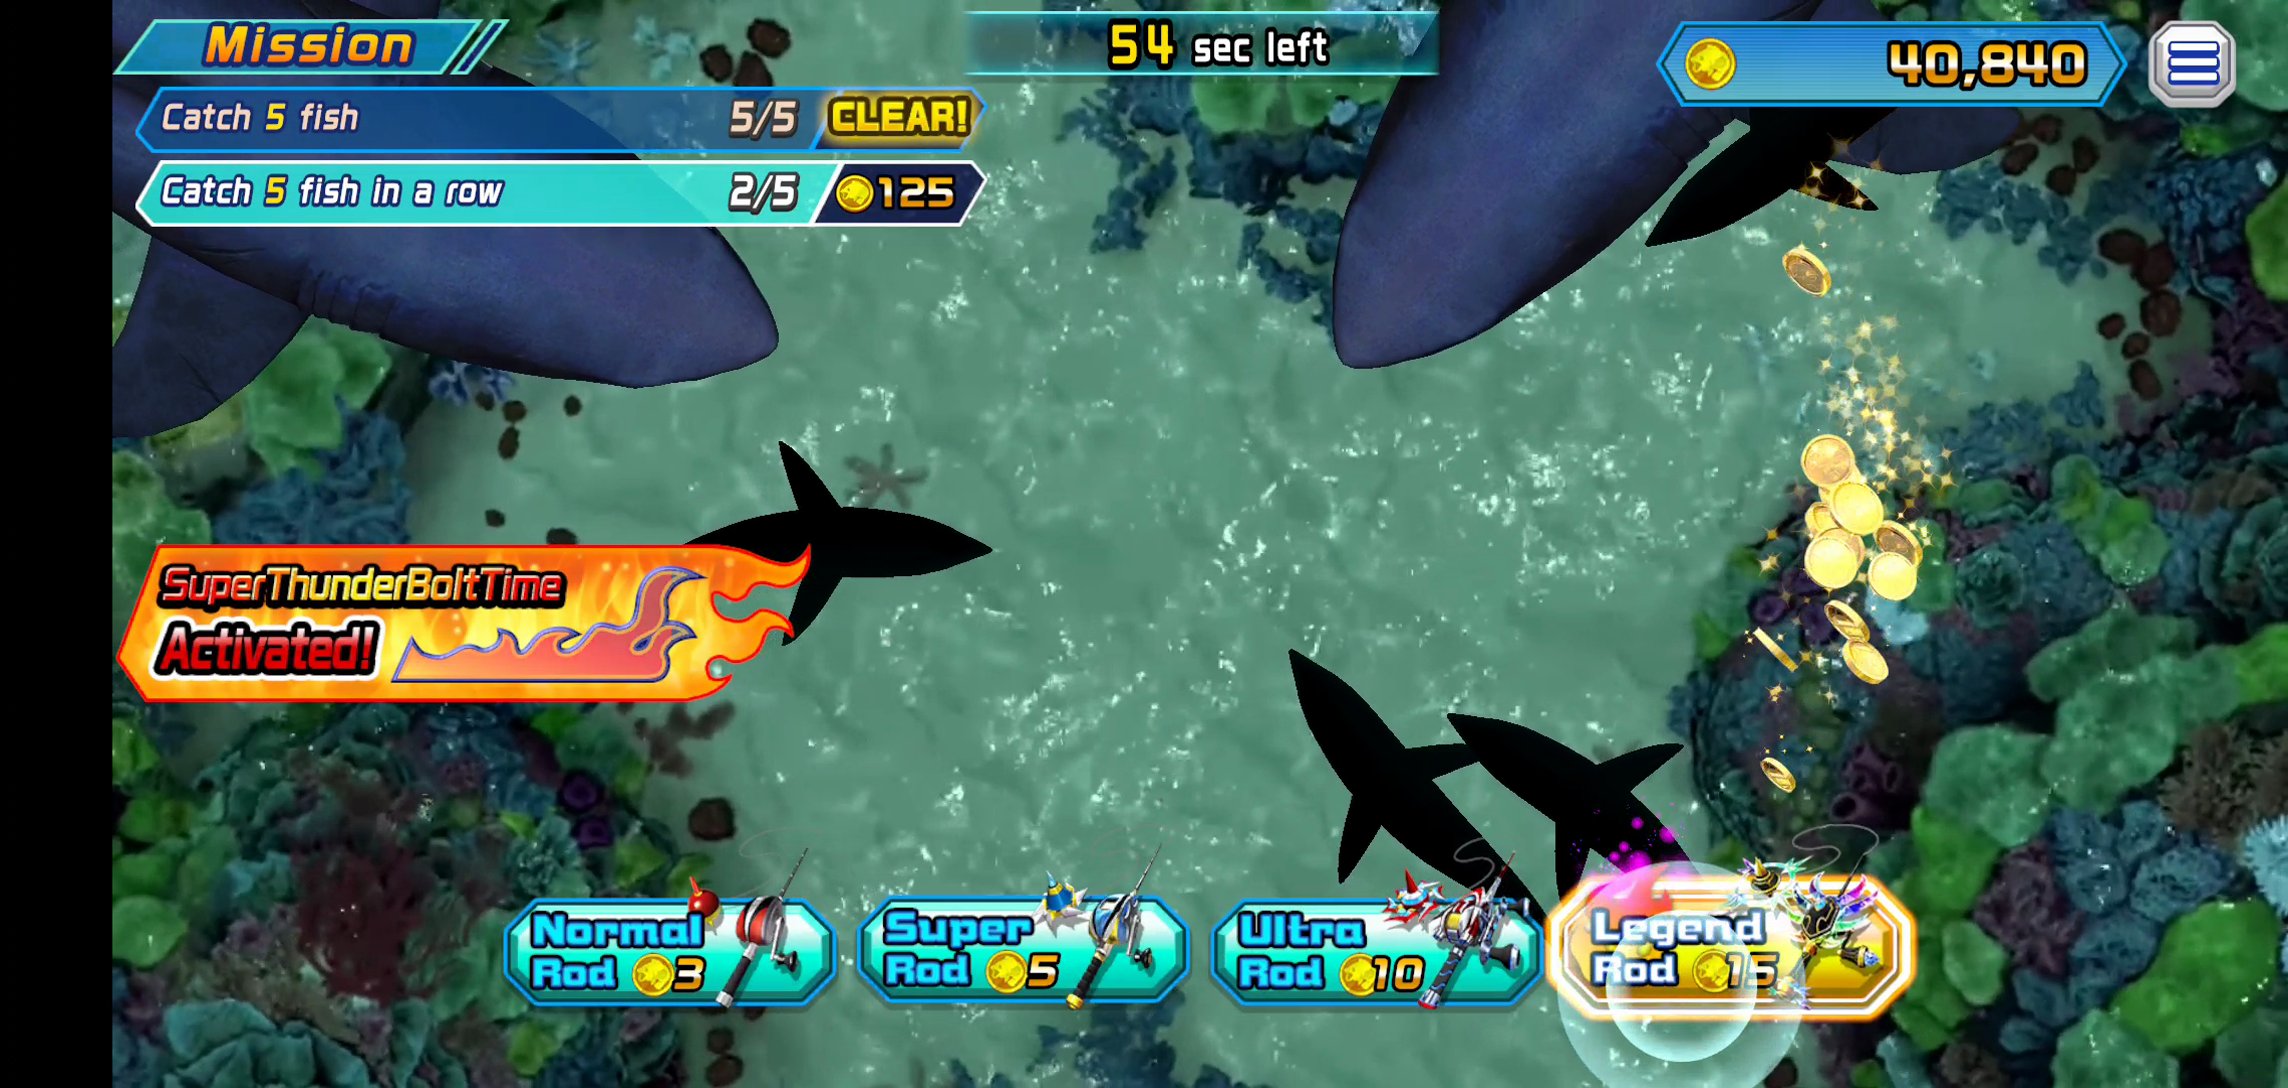 Bandai Namco US on X: Need more fish in your pocket? Ace Angler